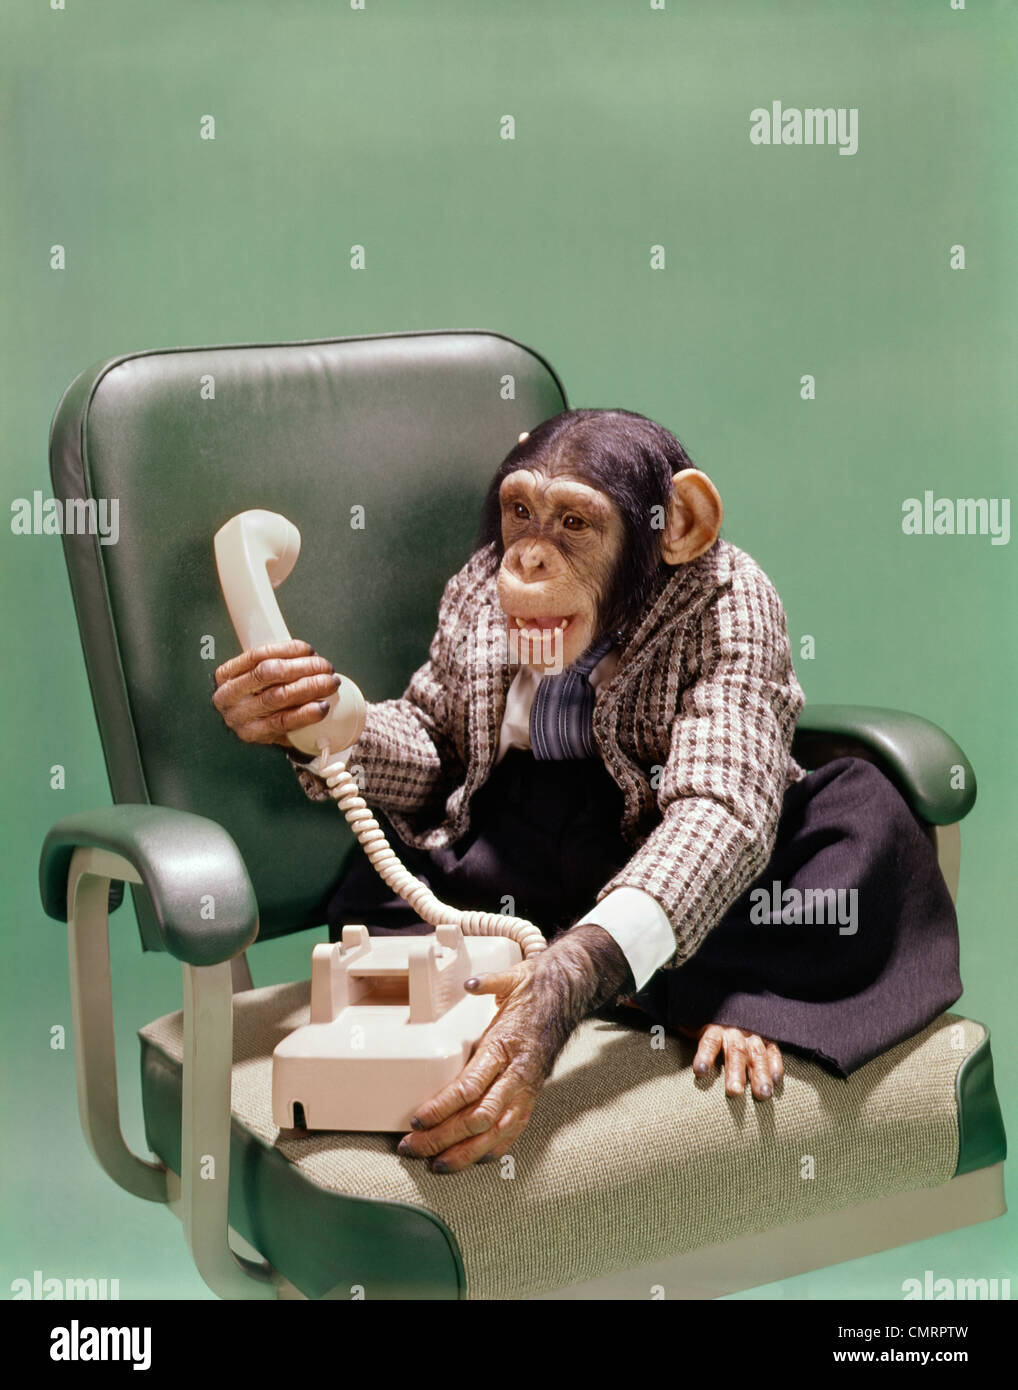 1970 1970s RETRO CHIMPANZEE WEARING BUSINESS SUIT SITTING IN OFFICE CHAIR USING TELEPHONE FUNNY HUMOROUS CHARACTER Stock Photo